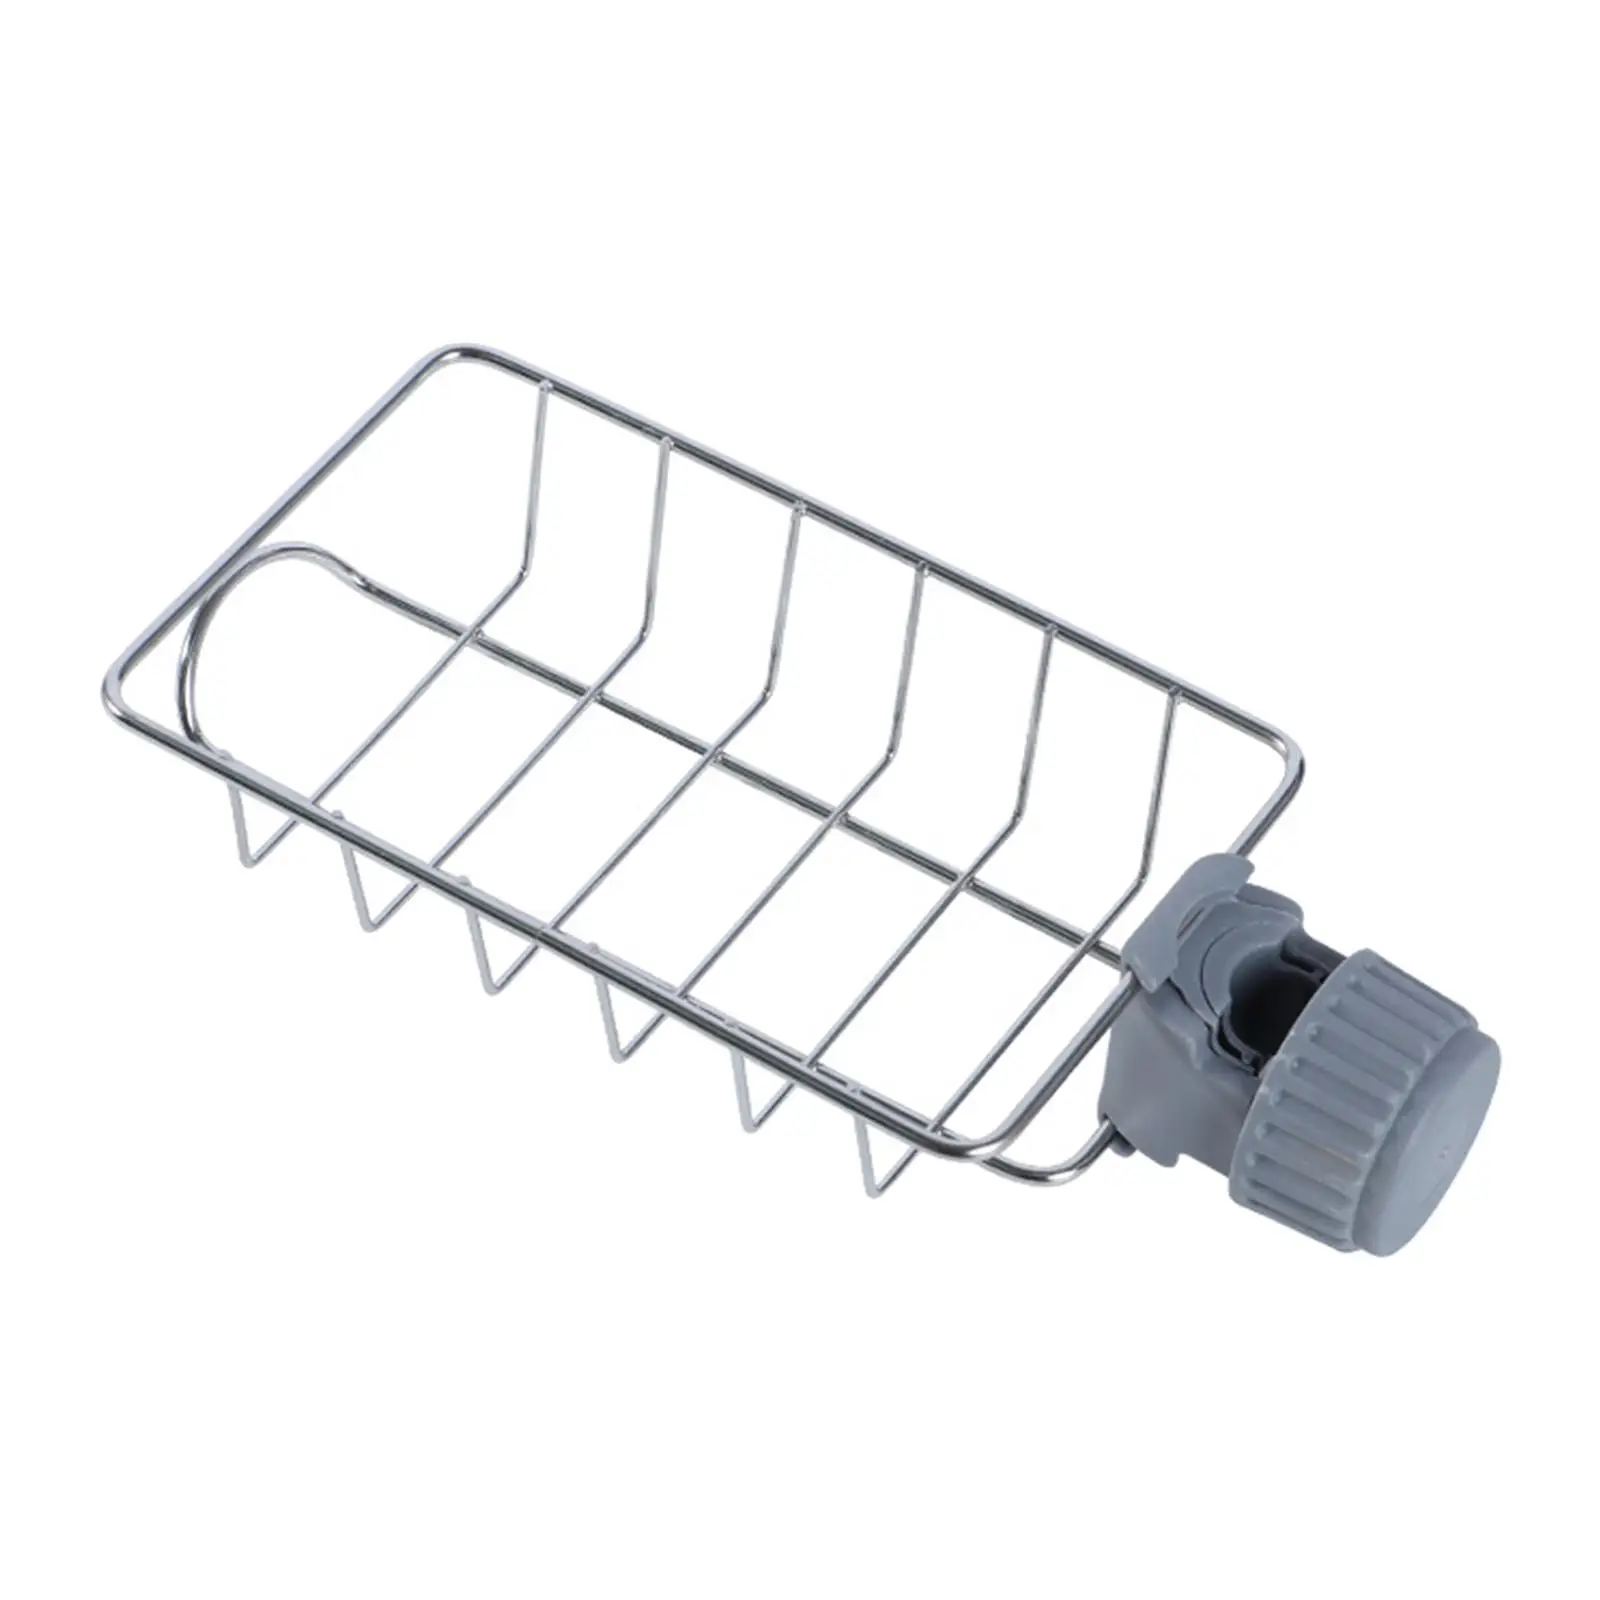 Kitchen Sink Drain Rack Faucet Drain Rack Dish Brush Holder Canopy Pole Storage Basket for Hiking Camping Tent Barbecue Kitchen